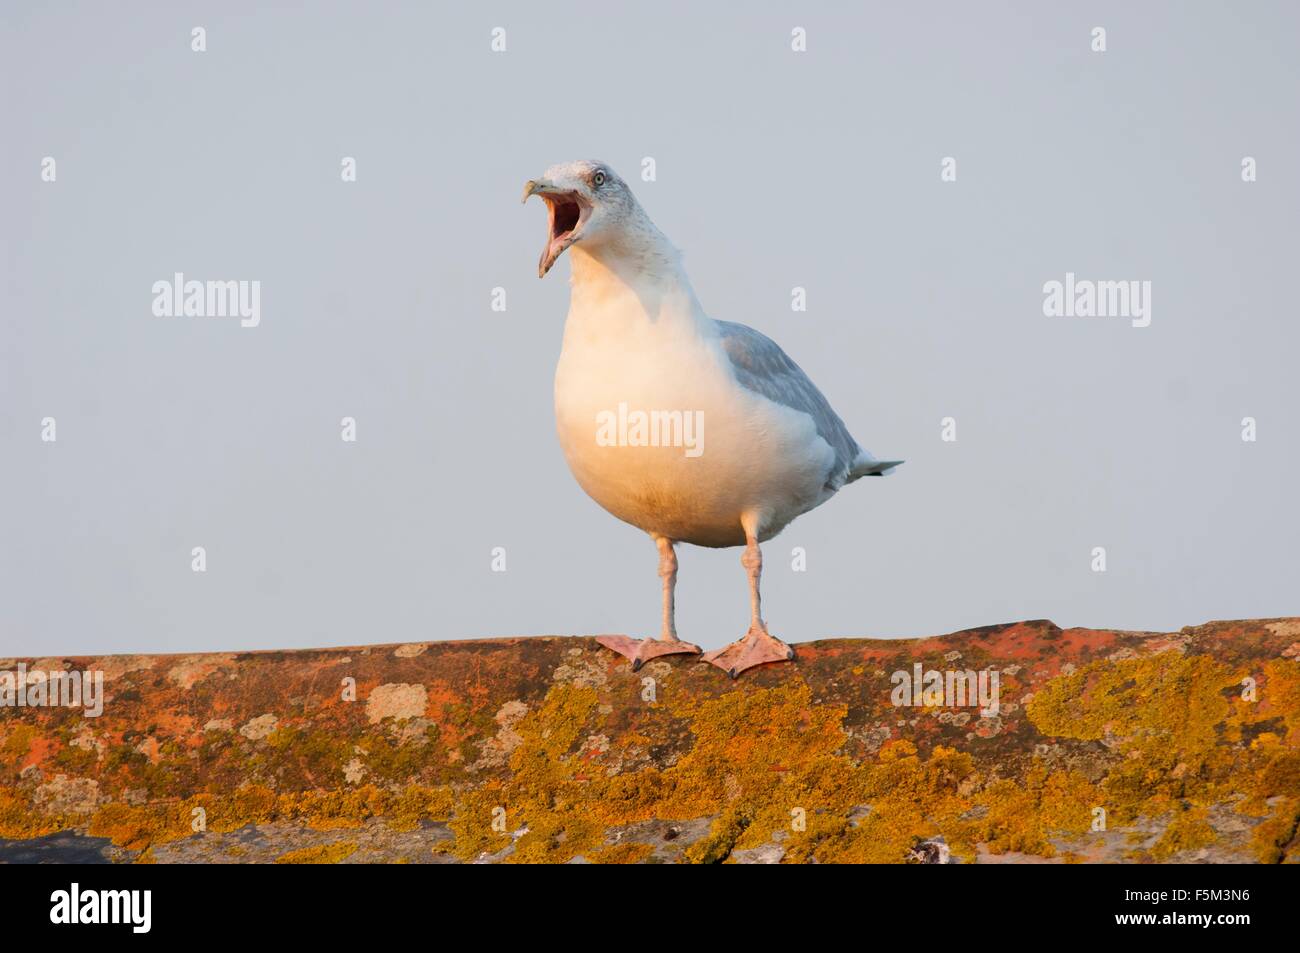 Portrait of seagull standing on wall Stock Photo